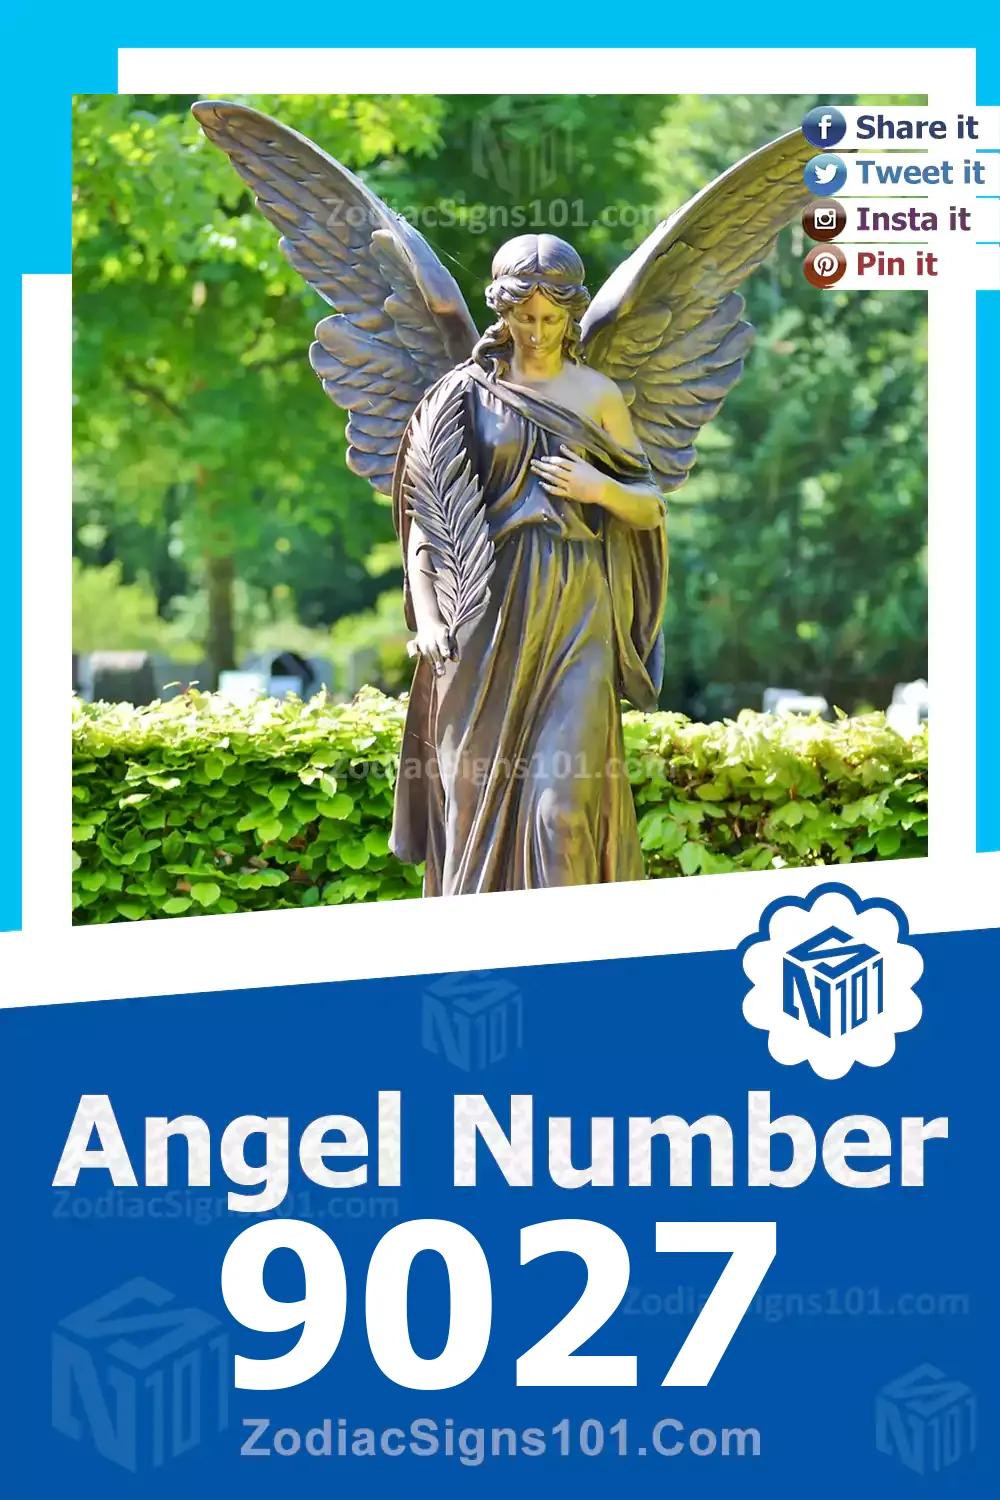 9027 Angel Number Meaning